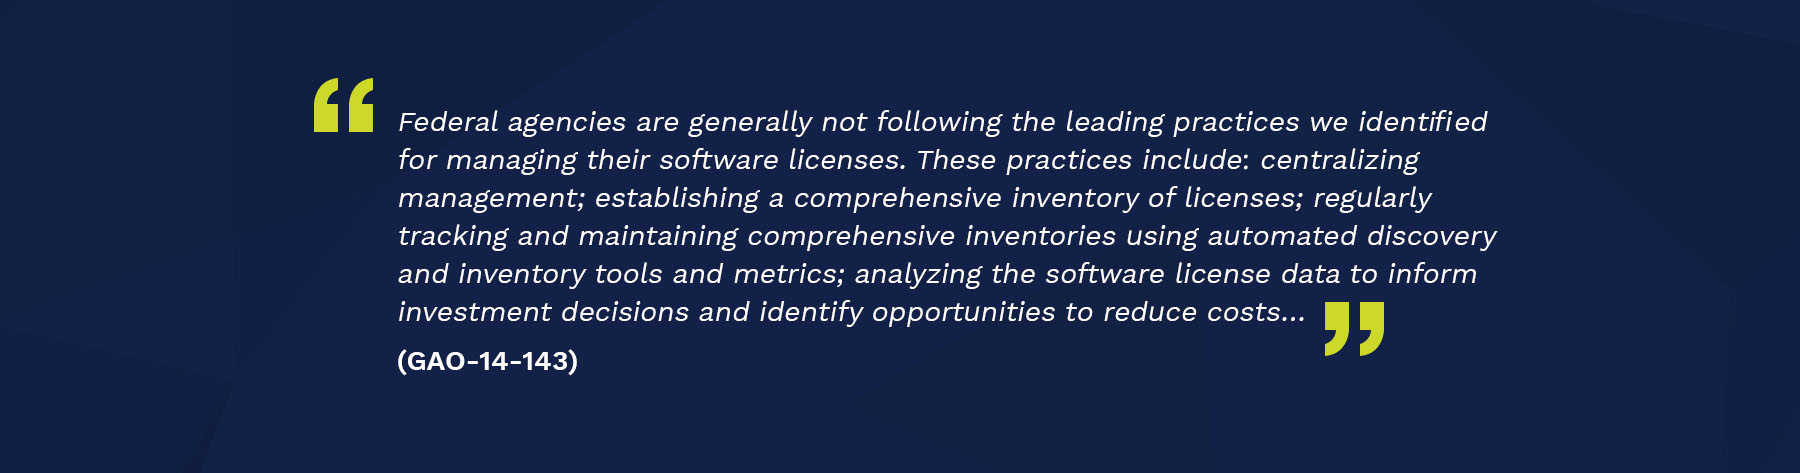 Blue background with quote. text reads: Federal agencies are generally not following the leading practices we identified for managing their software licenses.